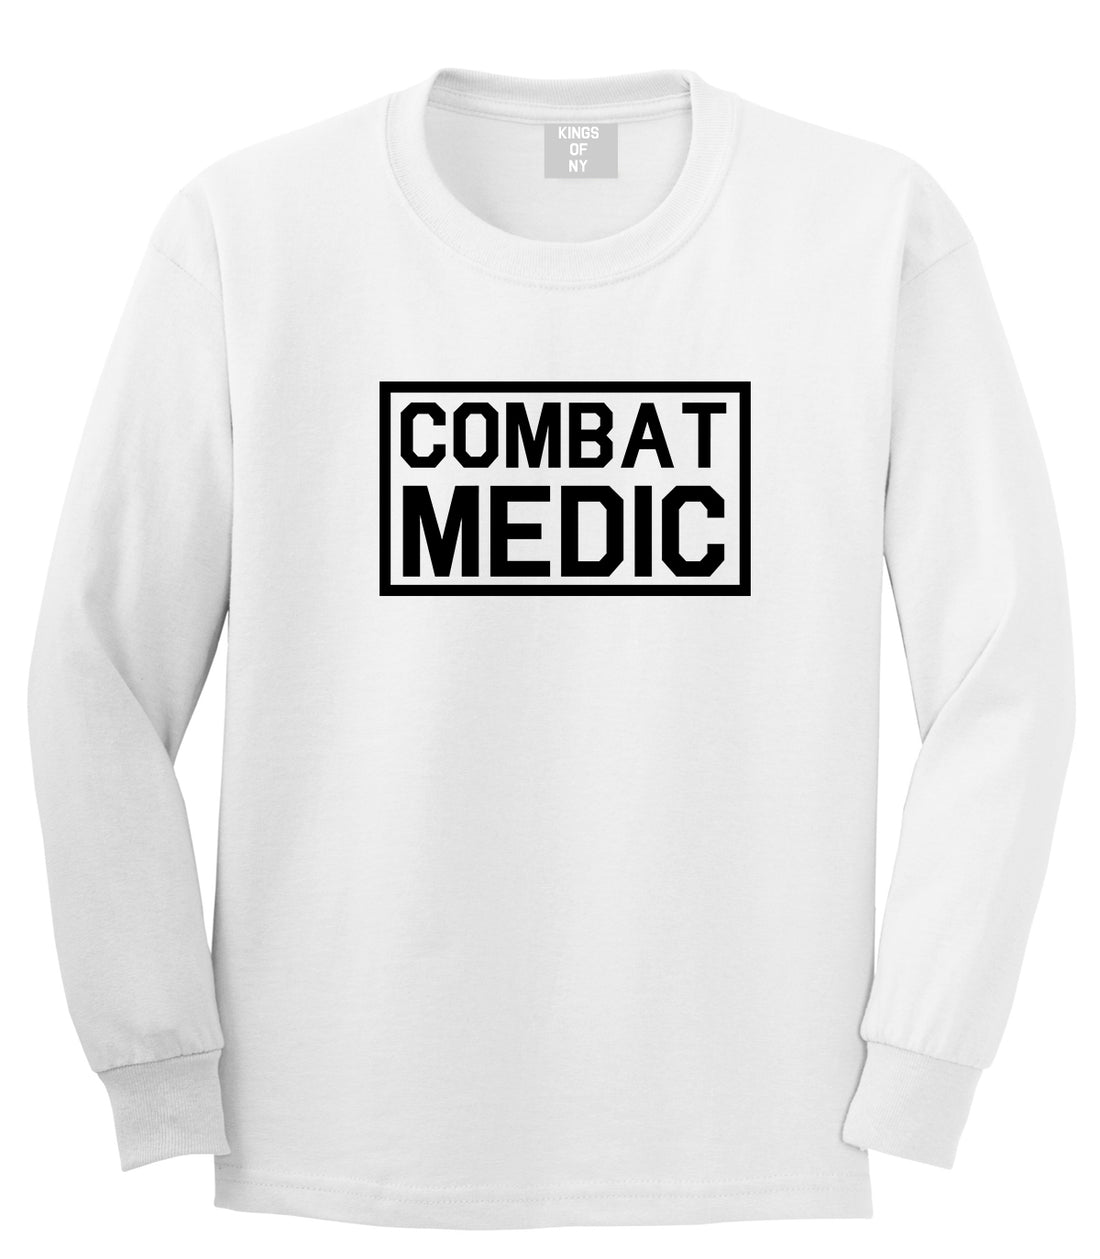 Combat Medic White Long Sleeve T-Shirt by Kings Of NY